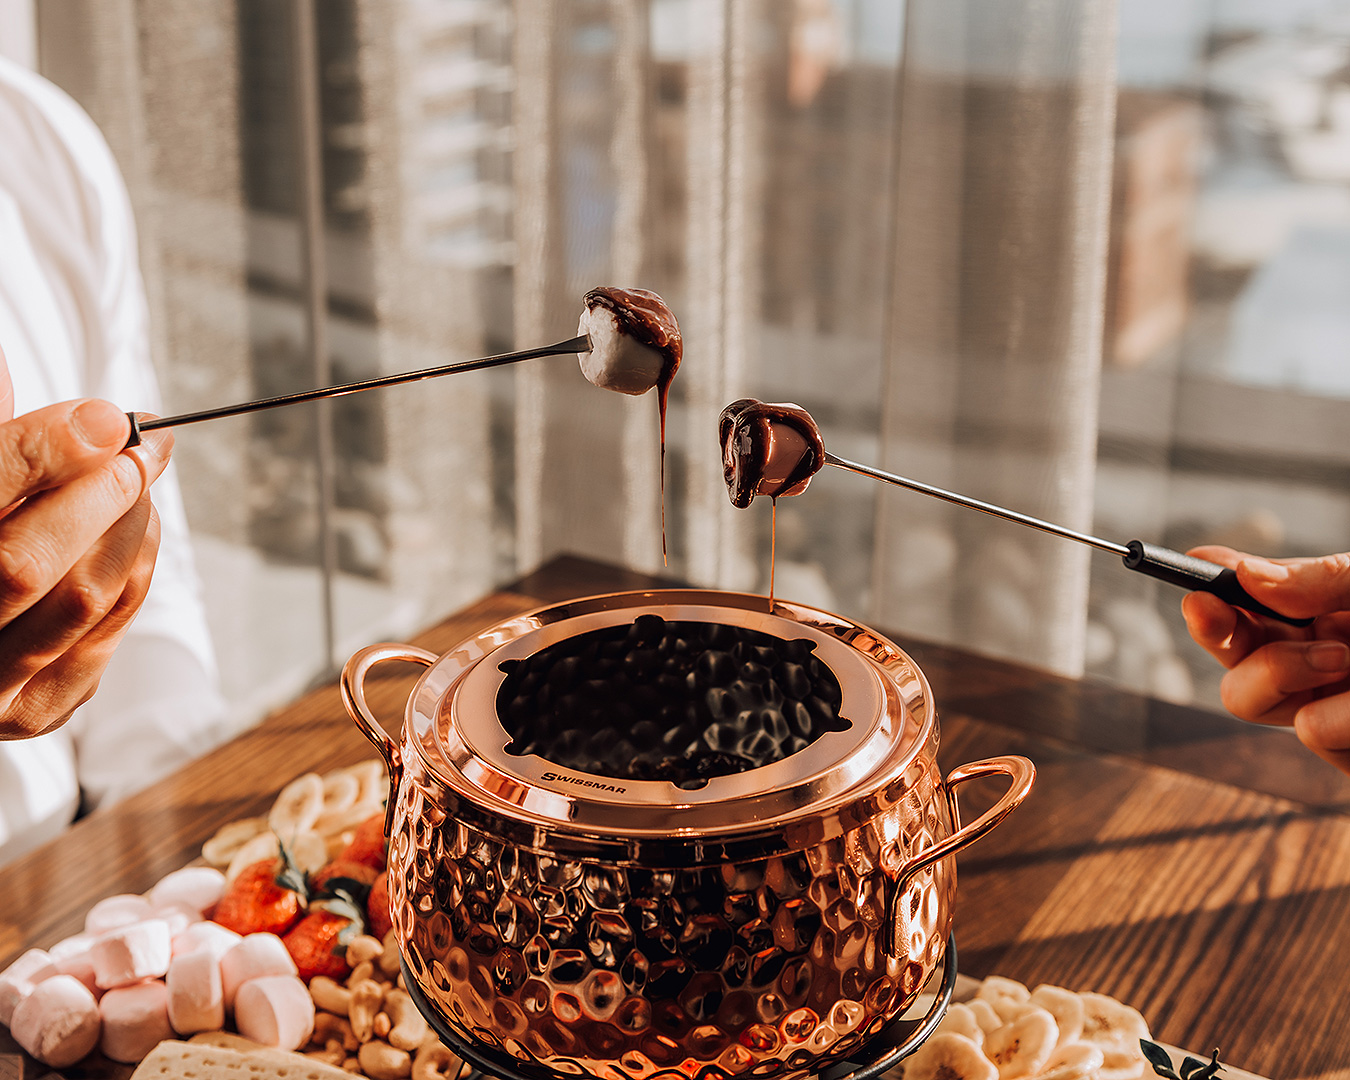 Two people dig into an epic chocolate fondue at Mövenpick hotel auckland, one of the best hotels in Auckland.